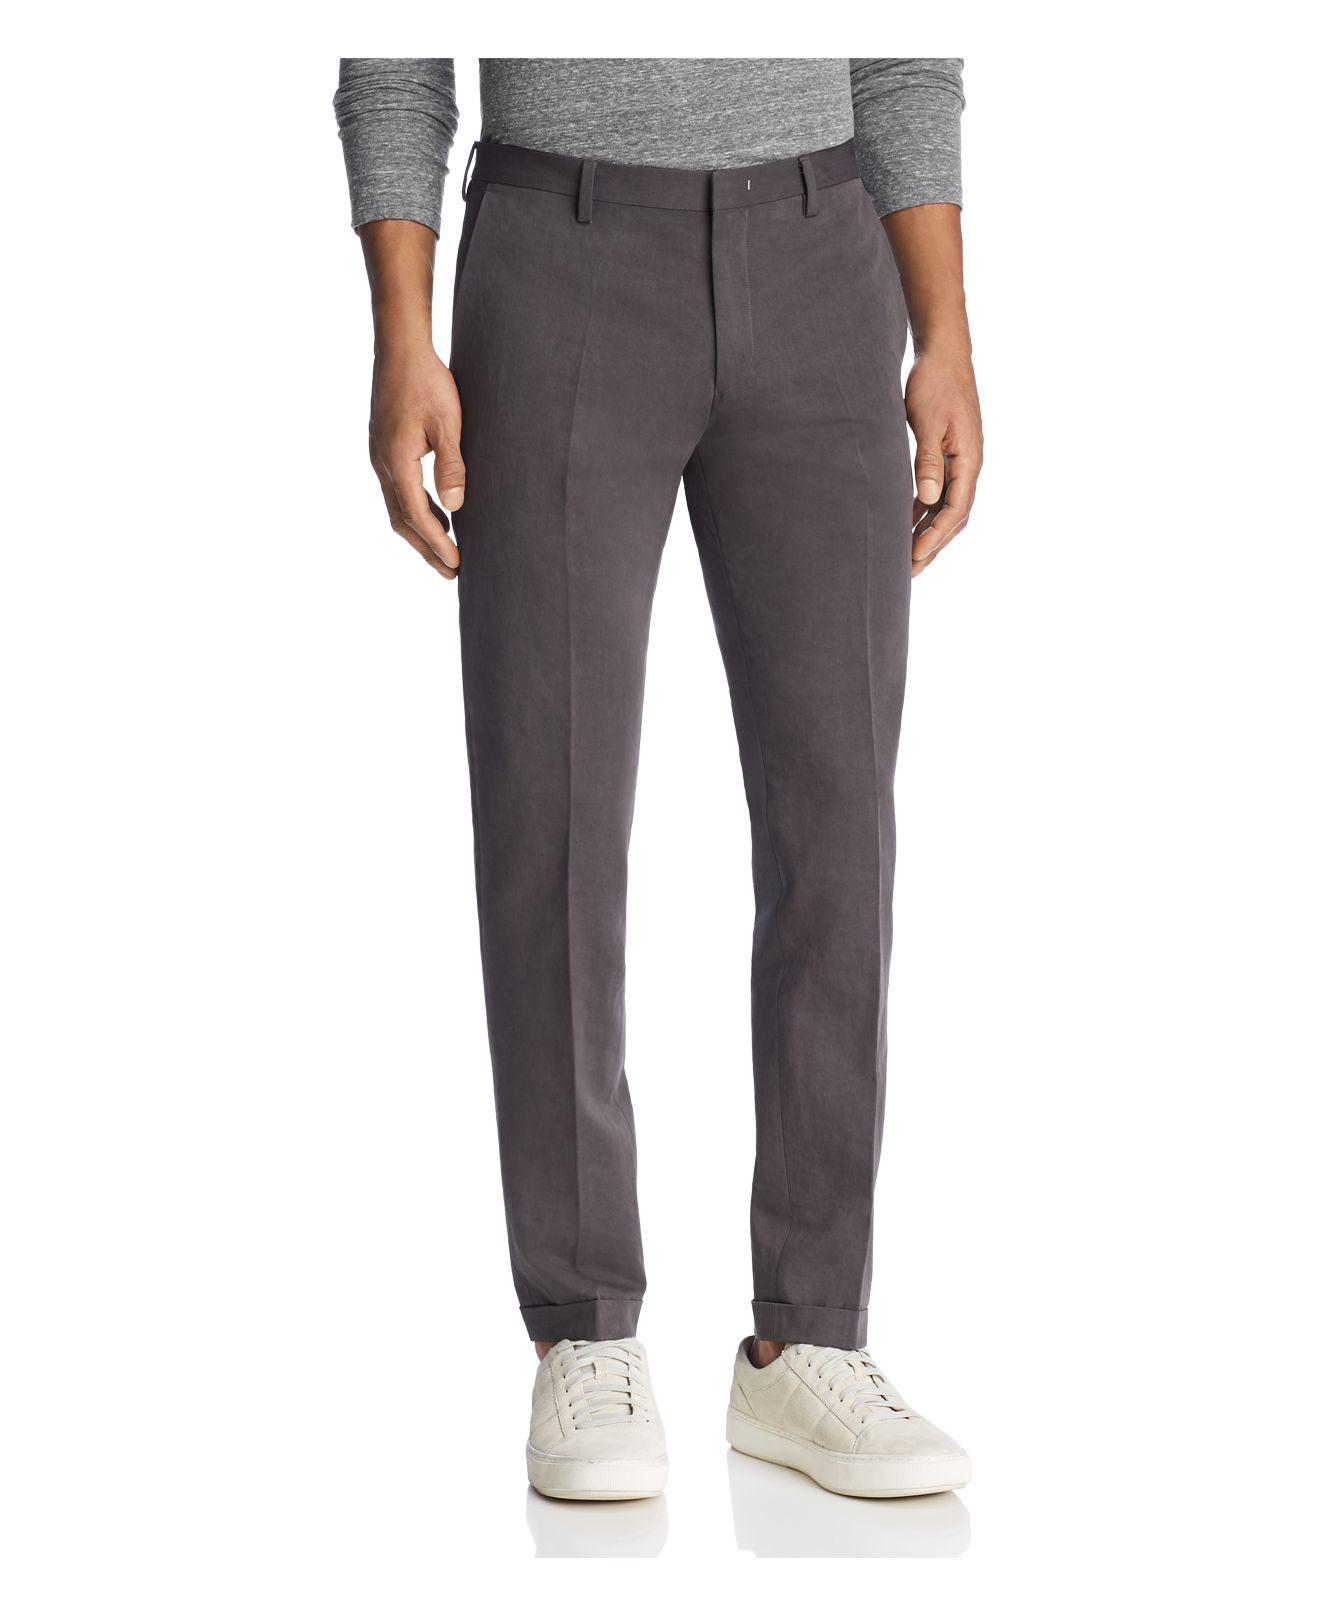 Lyst - Paul smith Italian Cuffed Slim Fit Chinos in Gray for Men